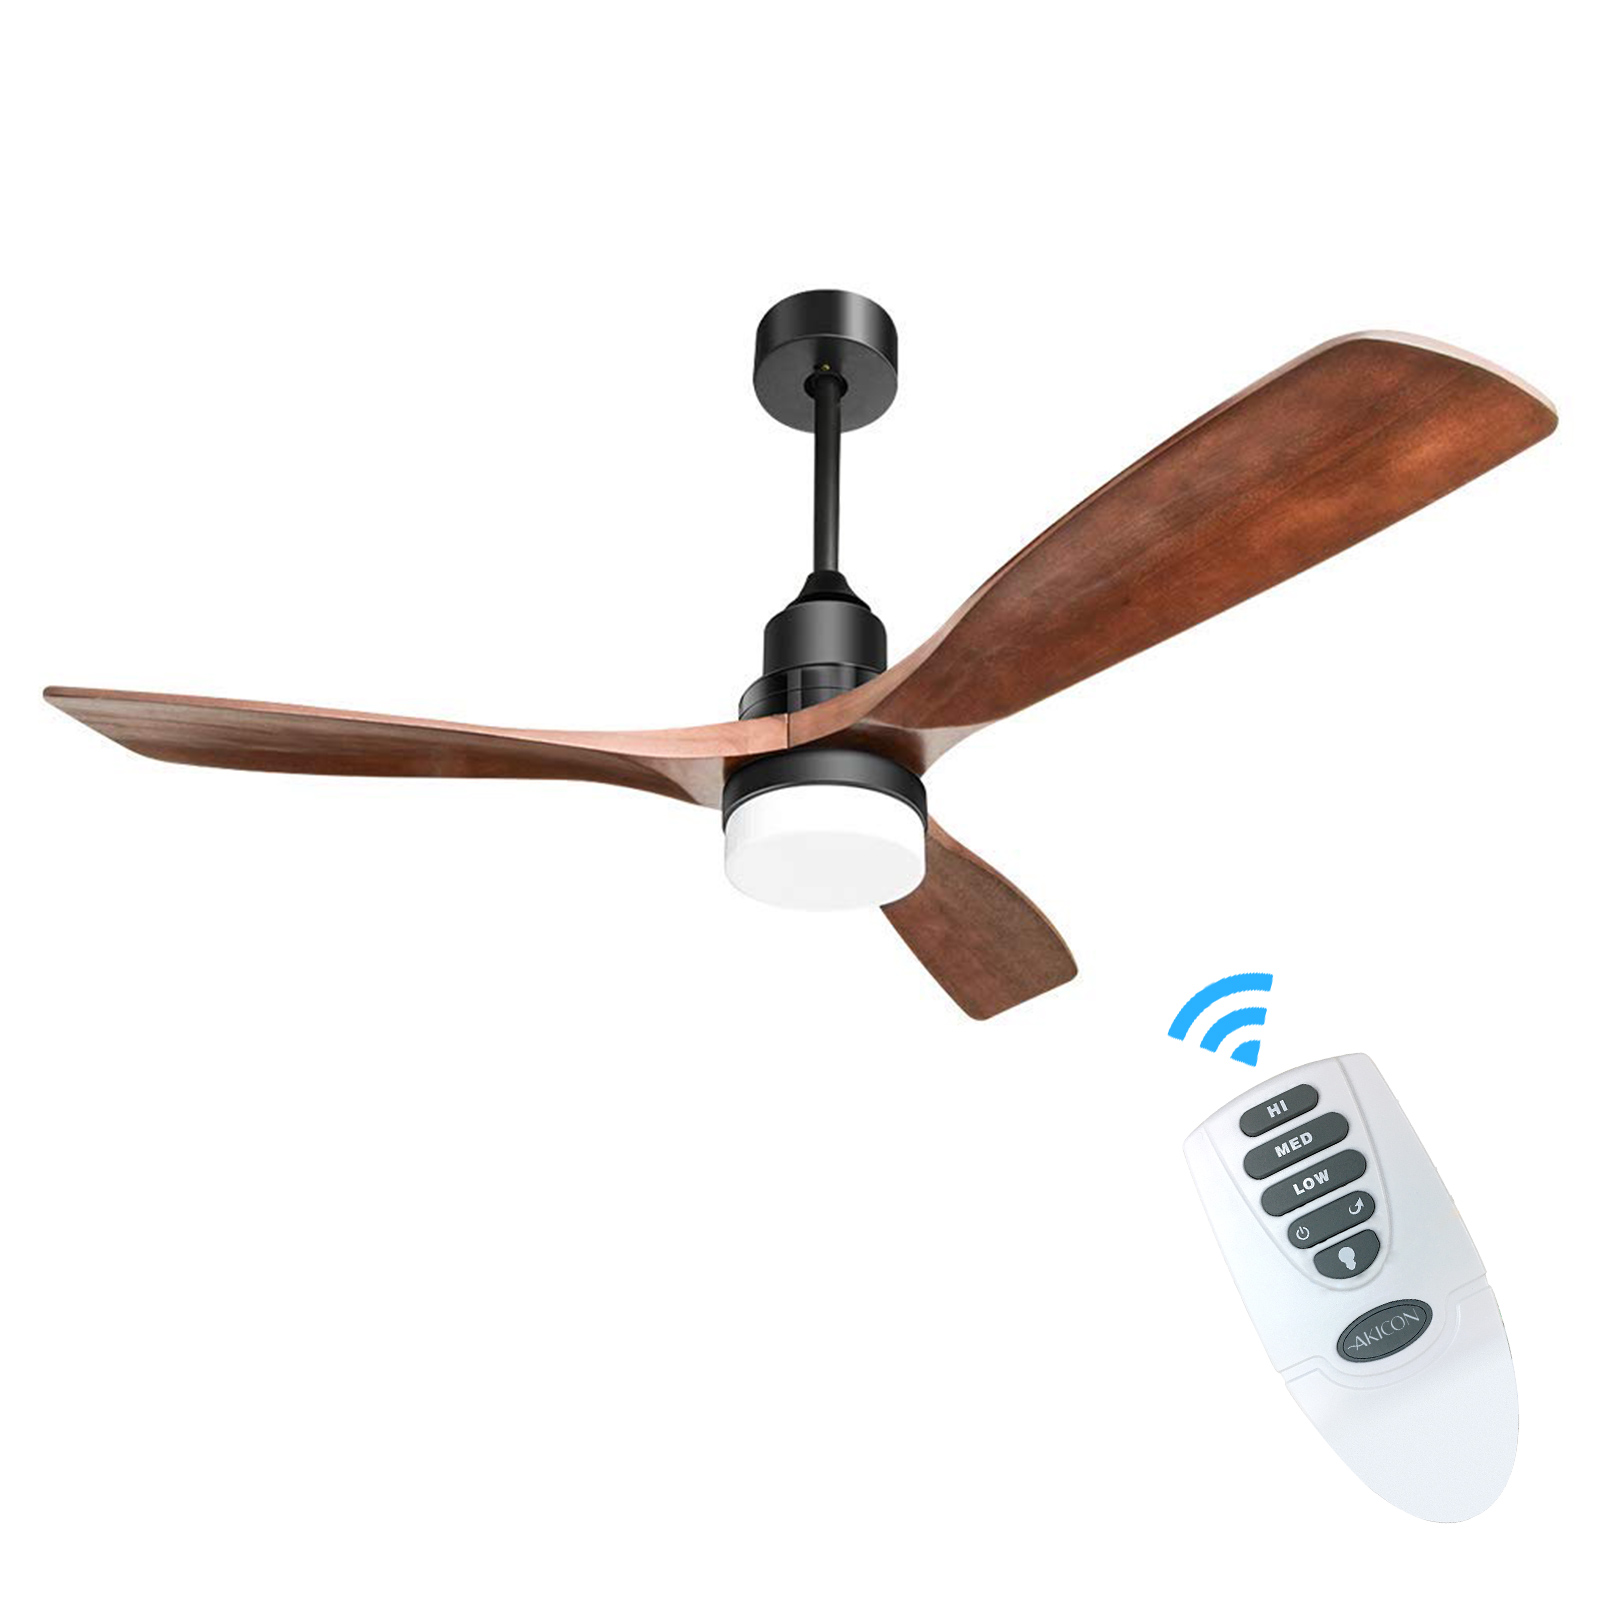 Details about   52" Ceiling Fan with Remote Control LED Light Reversible Motor and Blades Black 